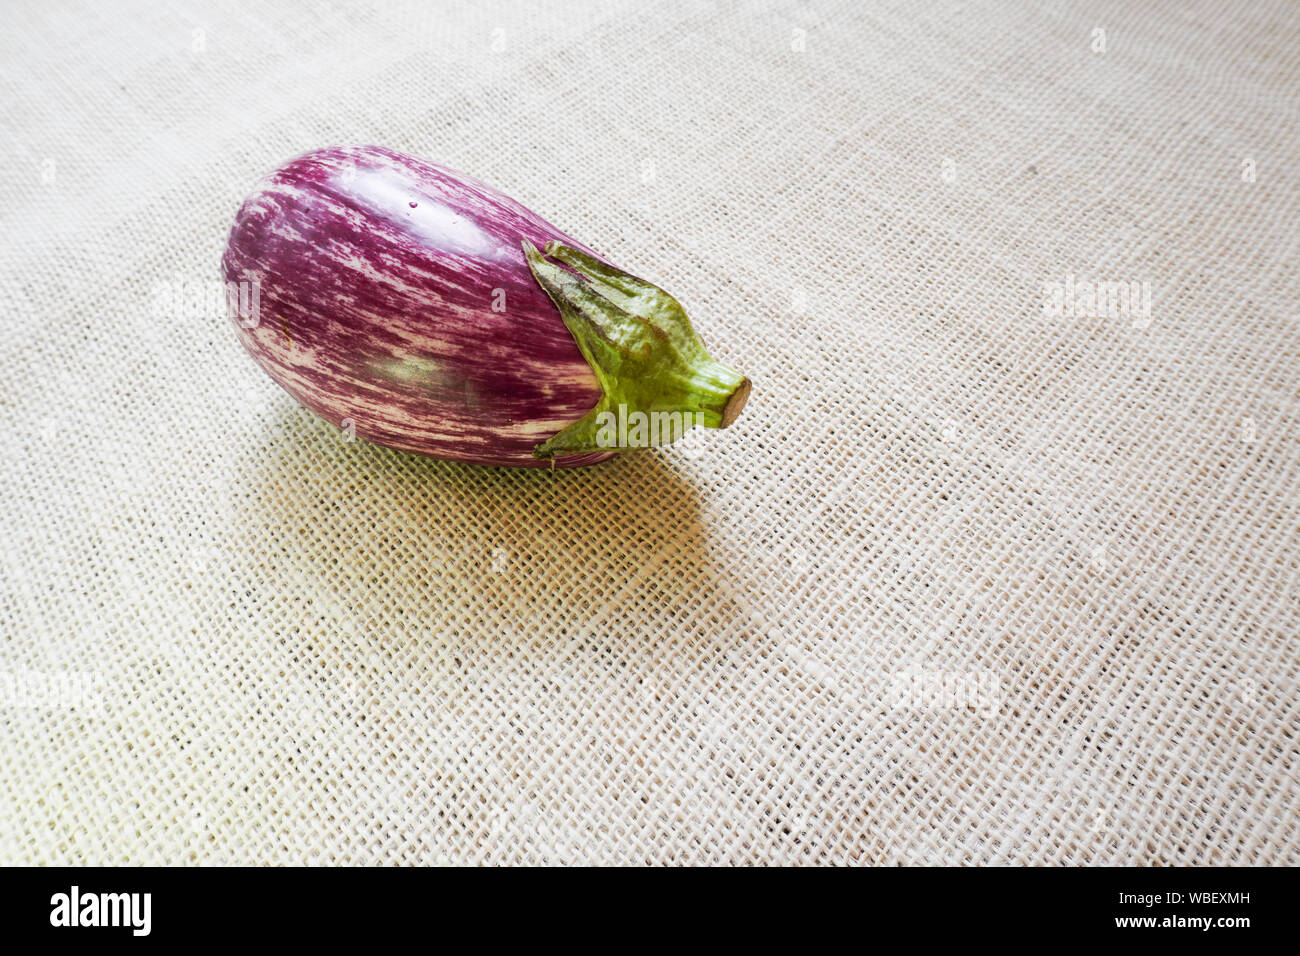 A ripe eggplant sits on a rustic burlap tablecloth Stock Photo